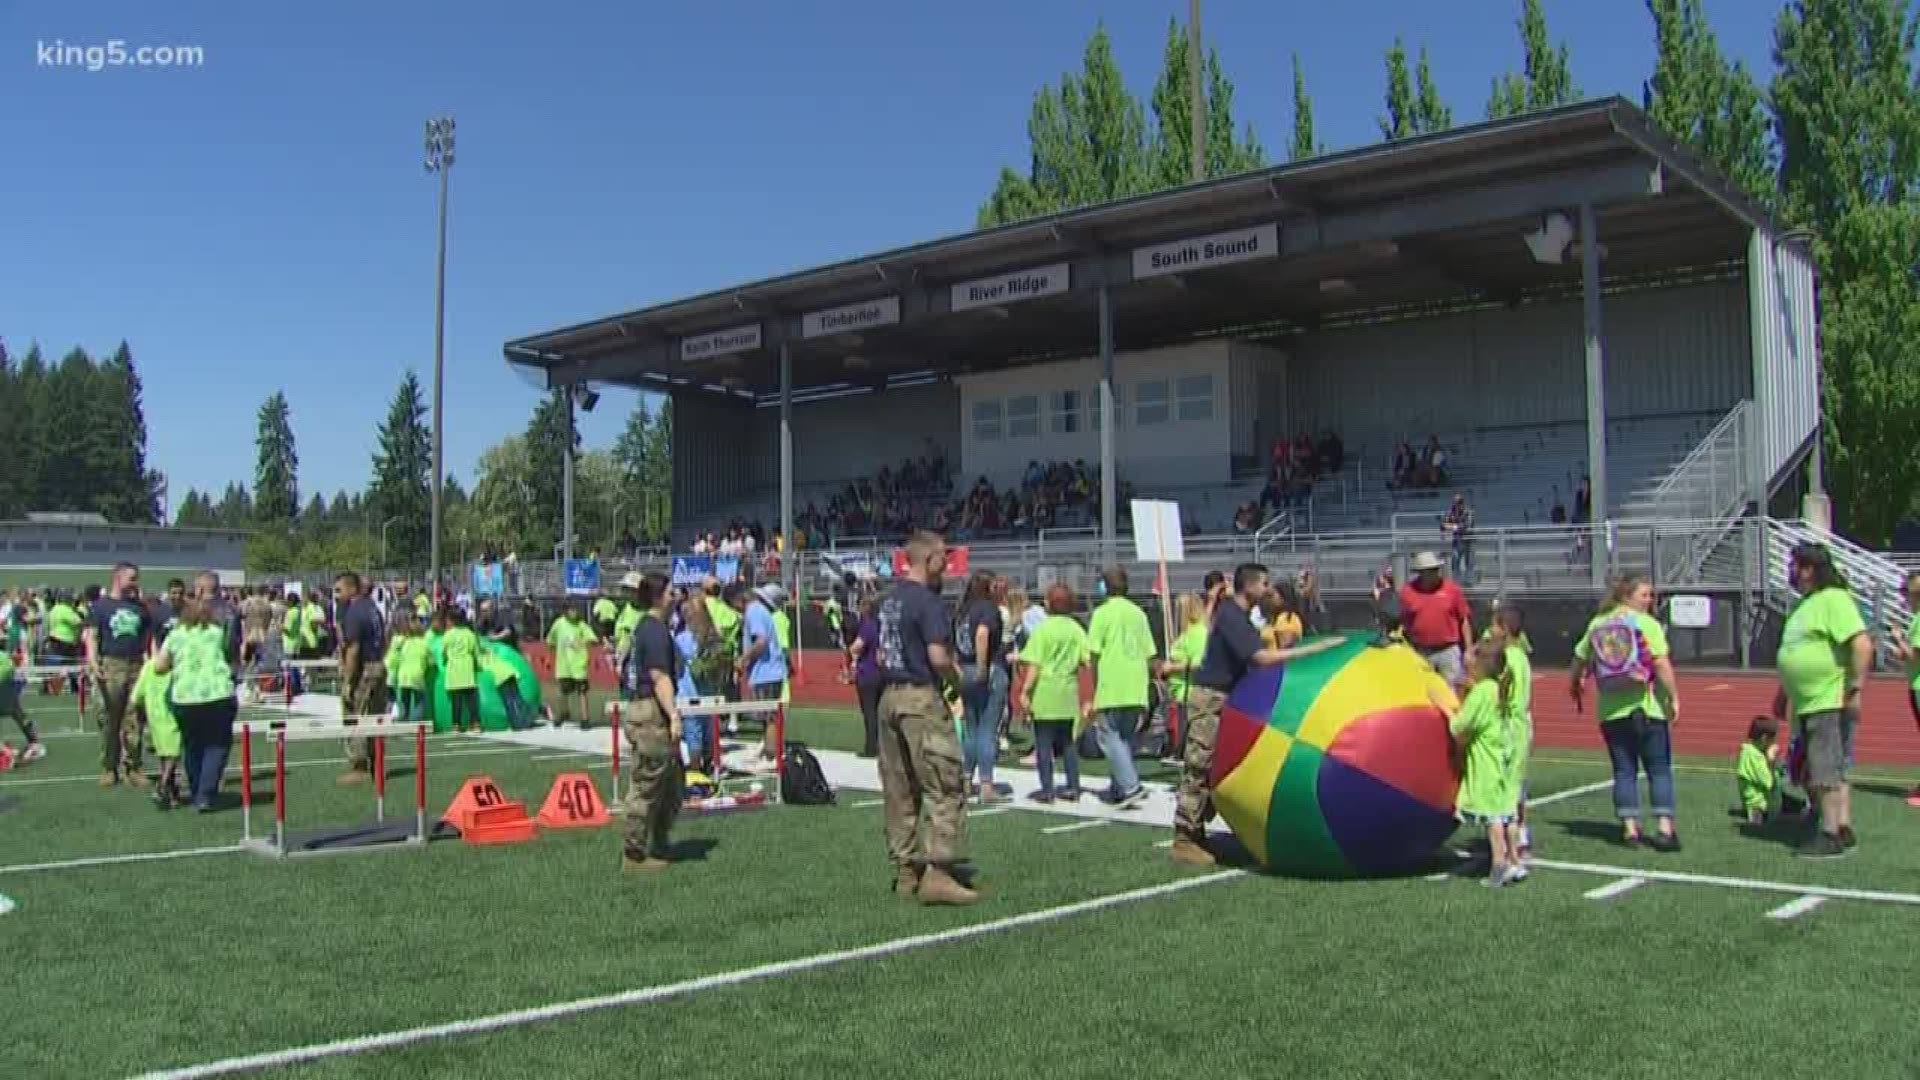 It's a school track meet like no other. But organizers hope Thurston County's 'Day of Champions' could inspire similar events across the state, and perhaps the country. South Bureau Chief Drew Mikkelsen takes us to the competition where there are no losers.